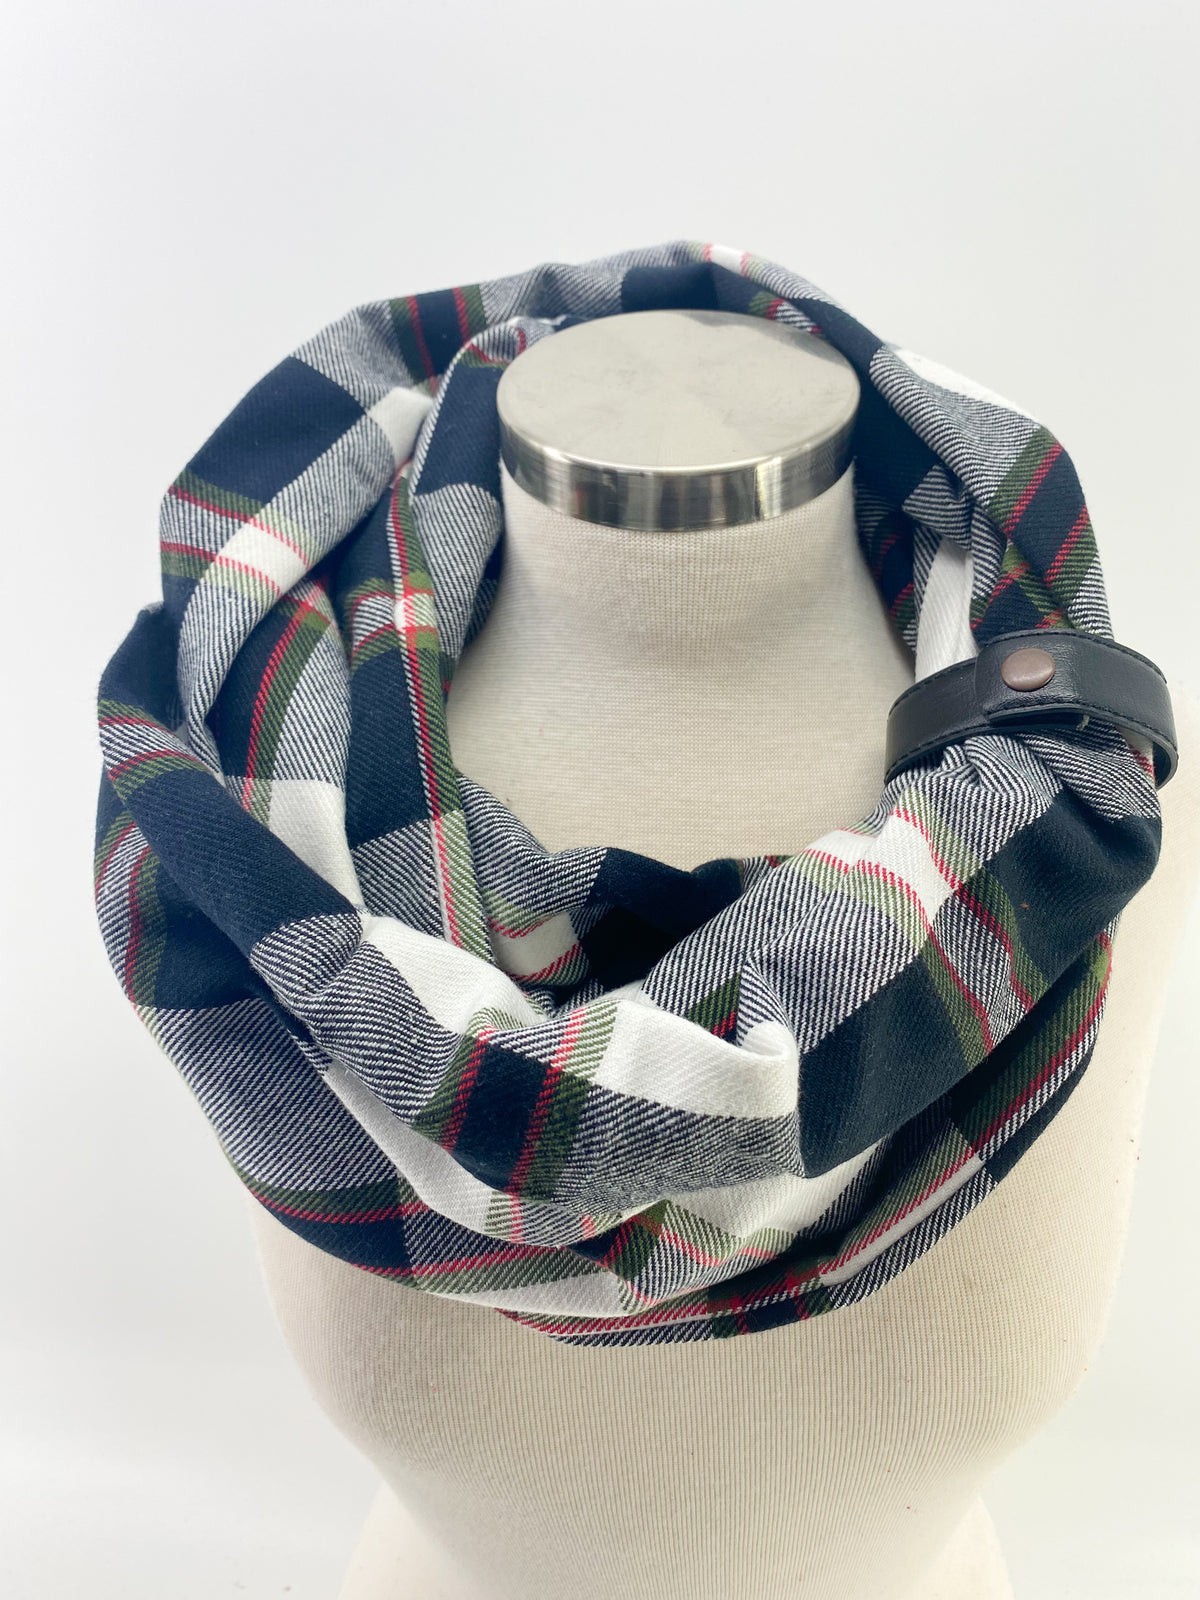 Black Green & Red Plaid Eternity Scarf with a Leather Cuff